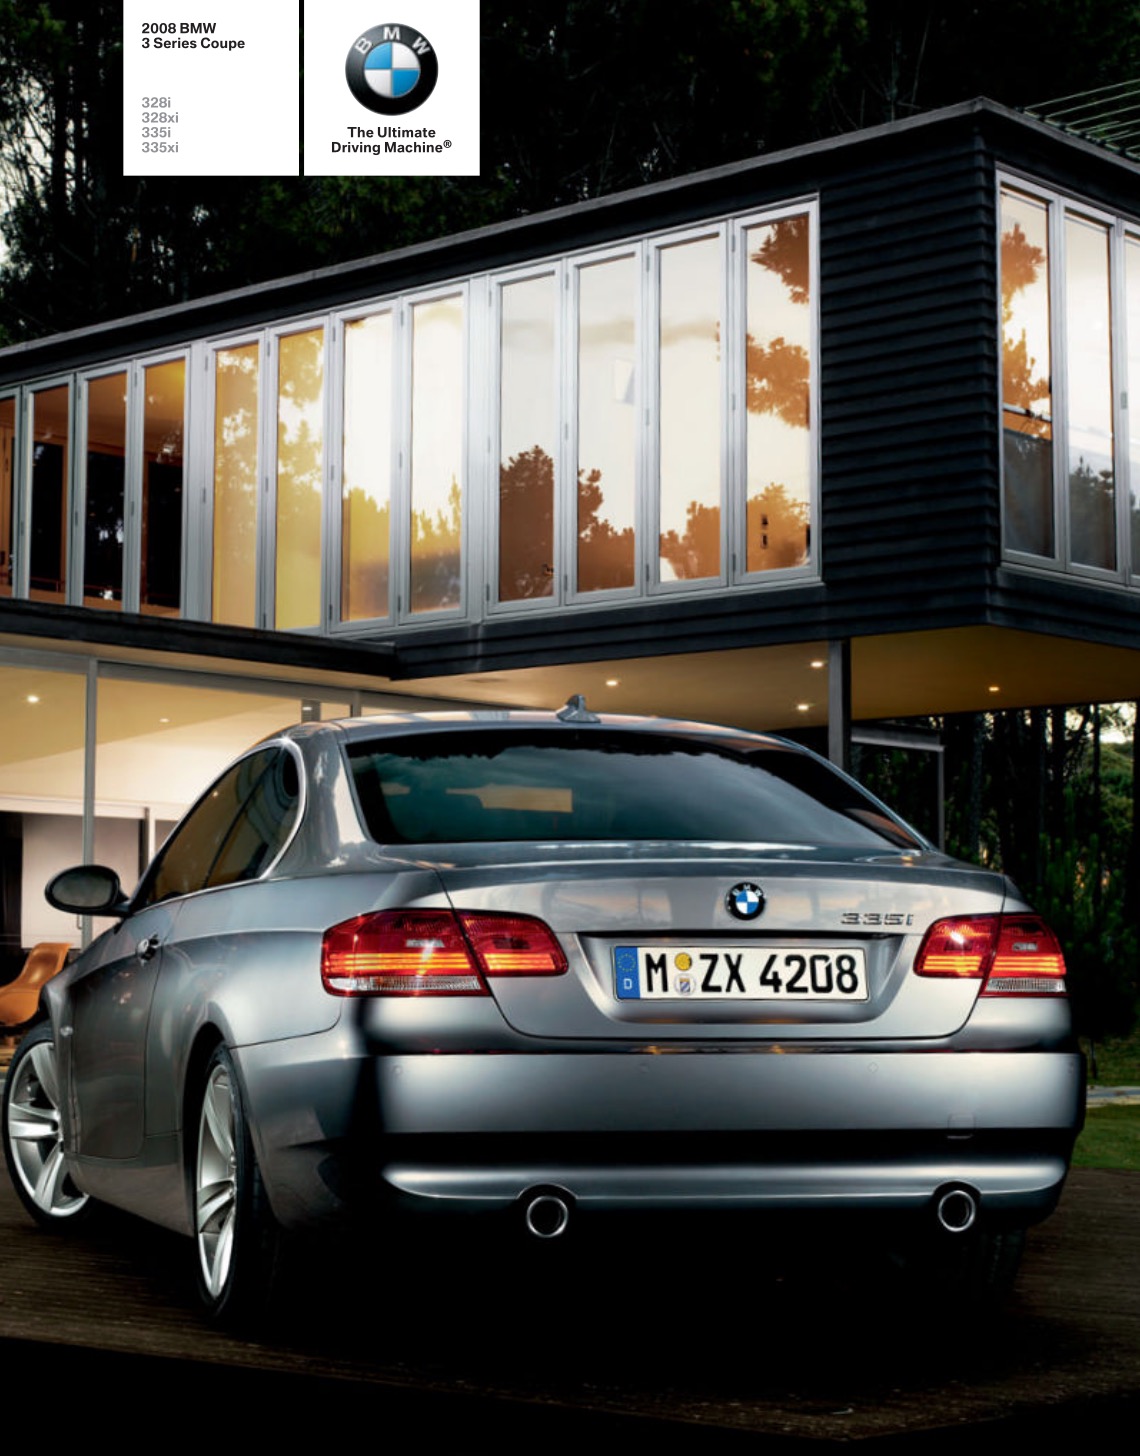 2008 BMW 3-Series Coupe Brochure